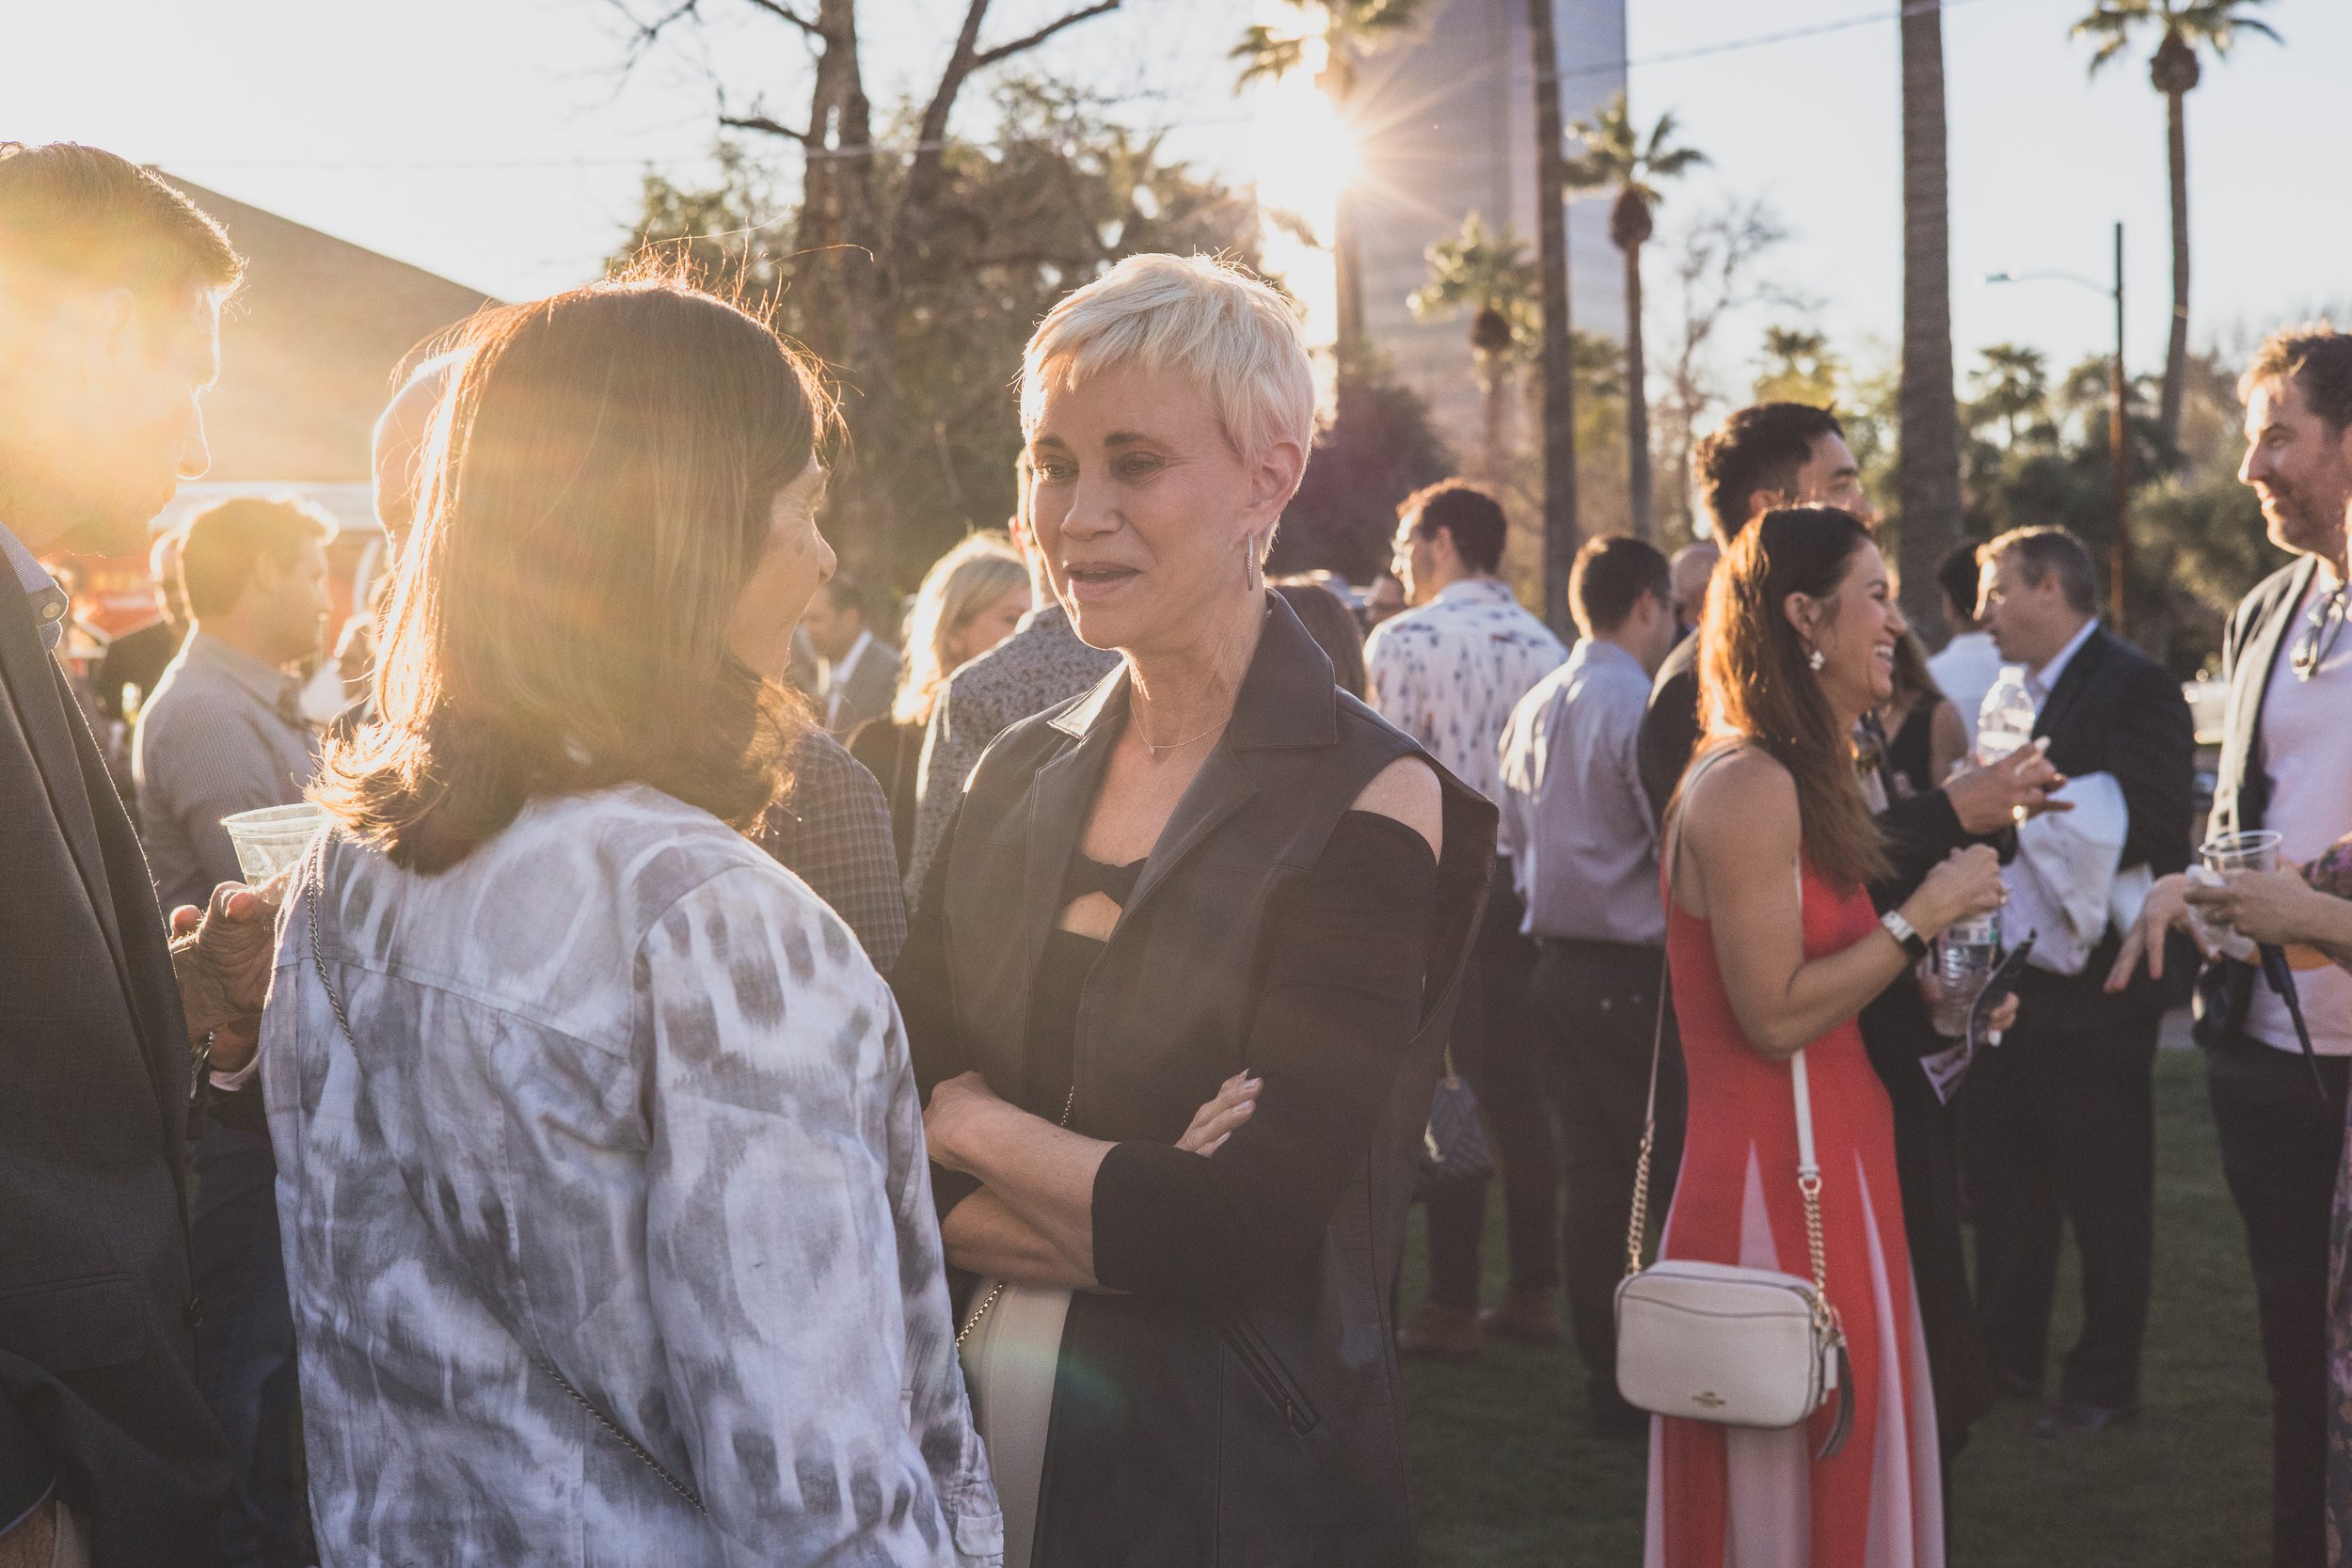 Guests talking at a Private Corporate at sunset in the Coronado House a Historic Downtown Phoenix's newest venue, by Candid Corporate Event Photographer; Jennifer Lind Schutsky.